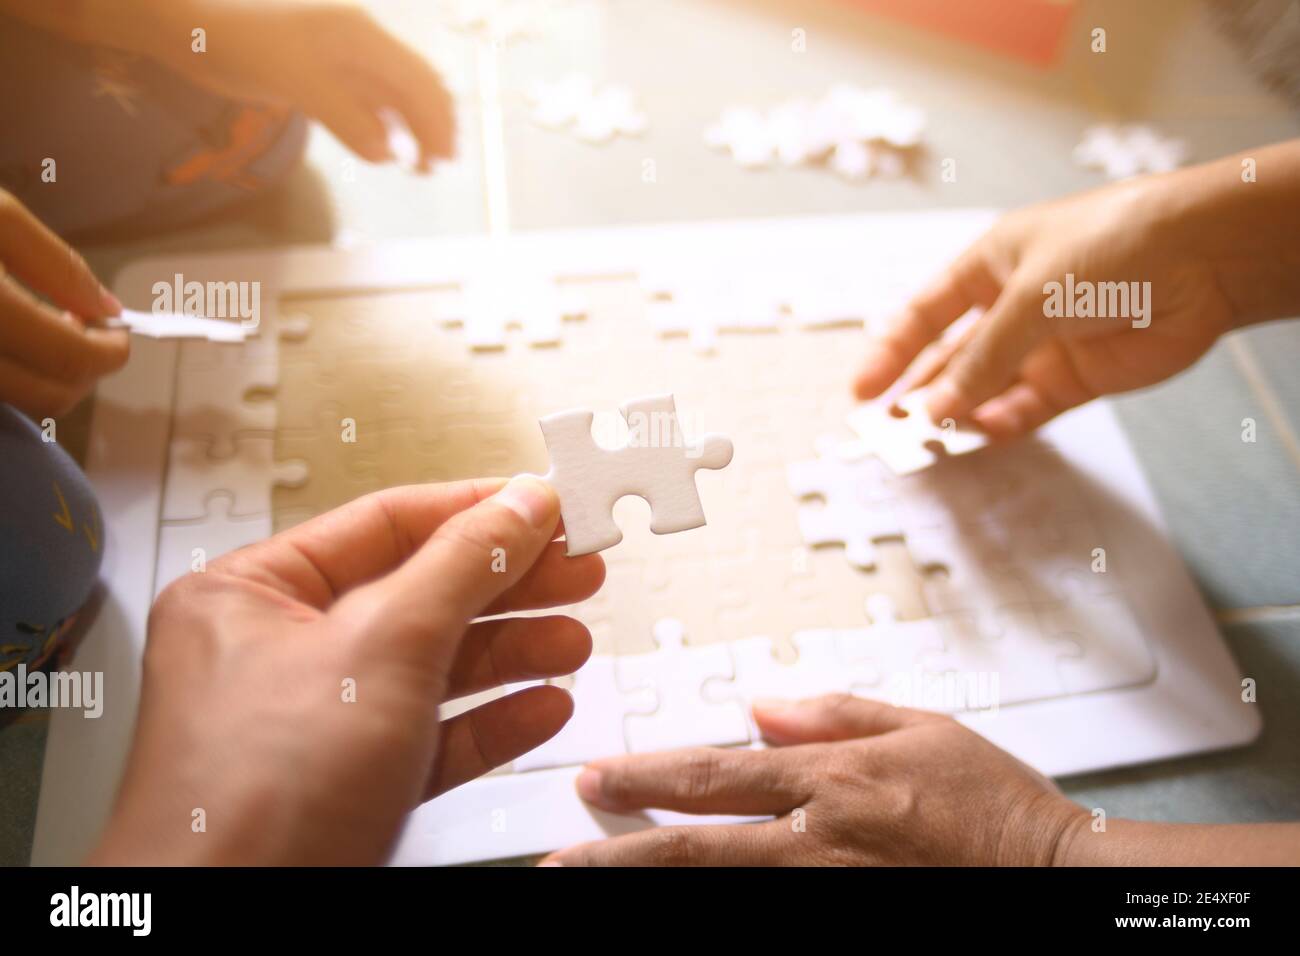 hand of father and little girl playing jigsaw puzzle for family concept shallow depth of field select focus on hands with sunlight affect Stock Photo